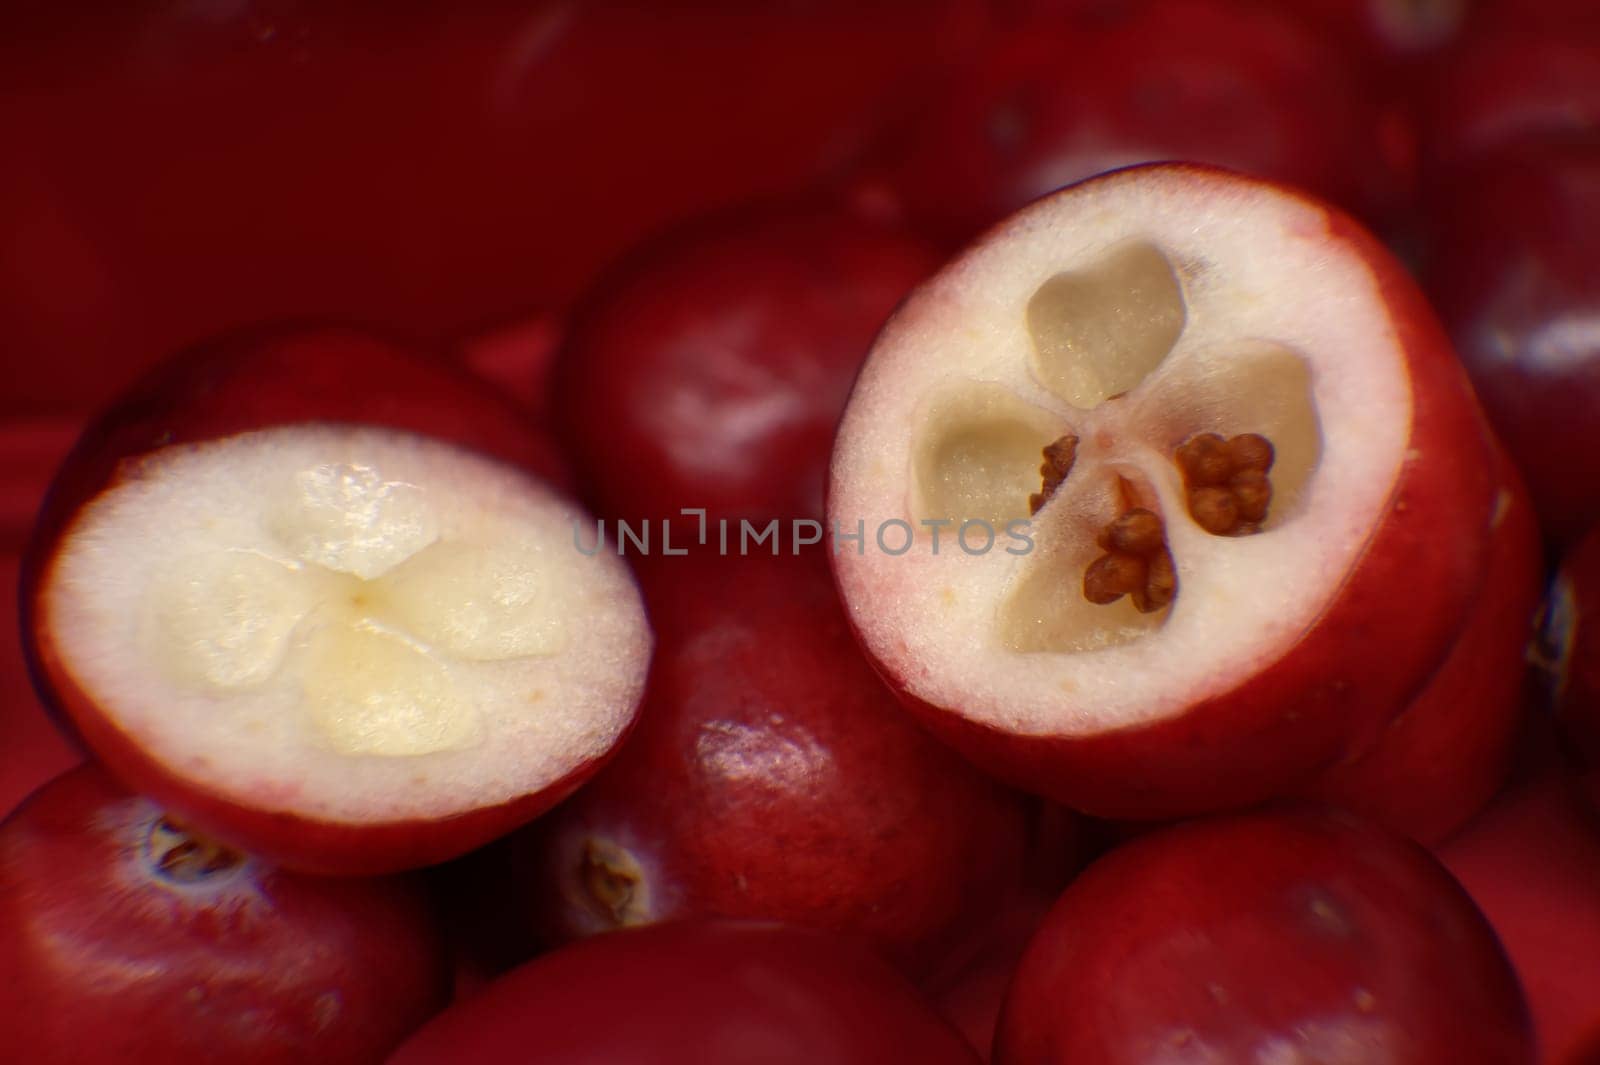 Half-cut cranberry shown revealing white interior with red seeds, macro image